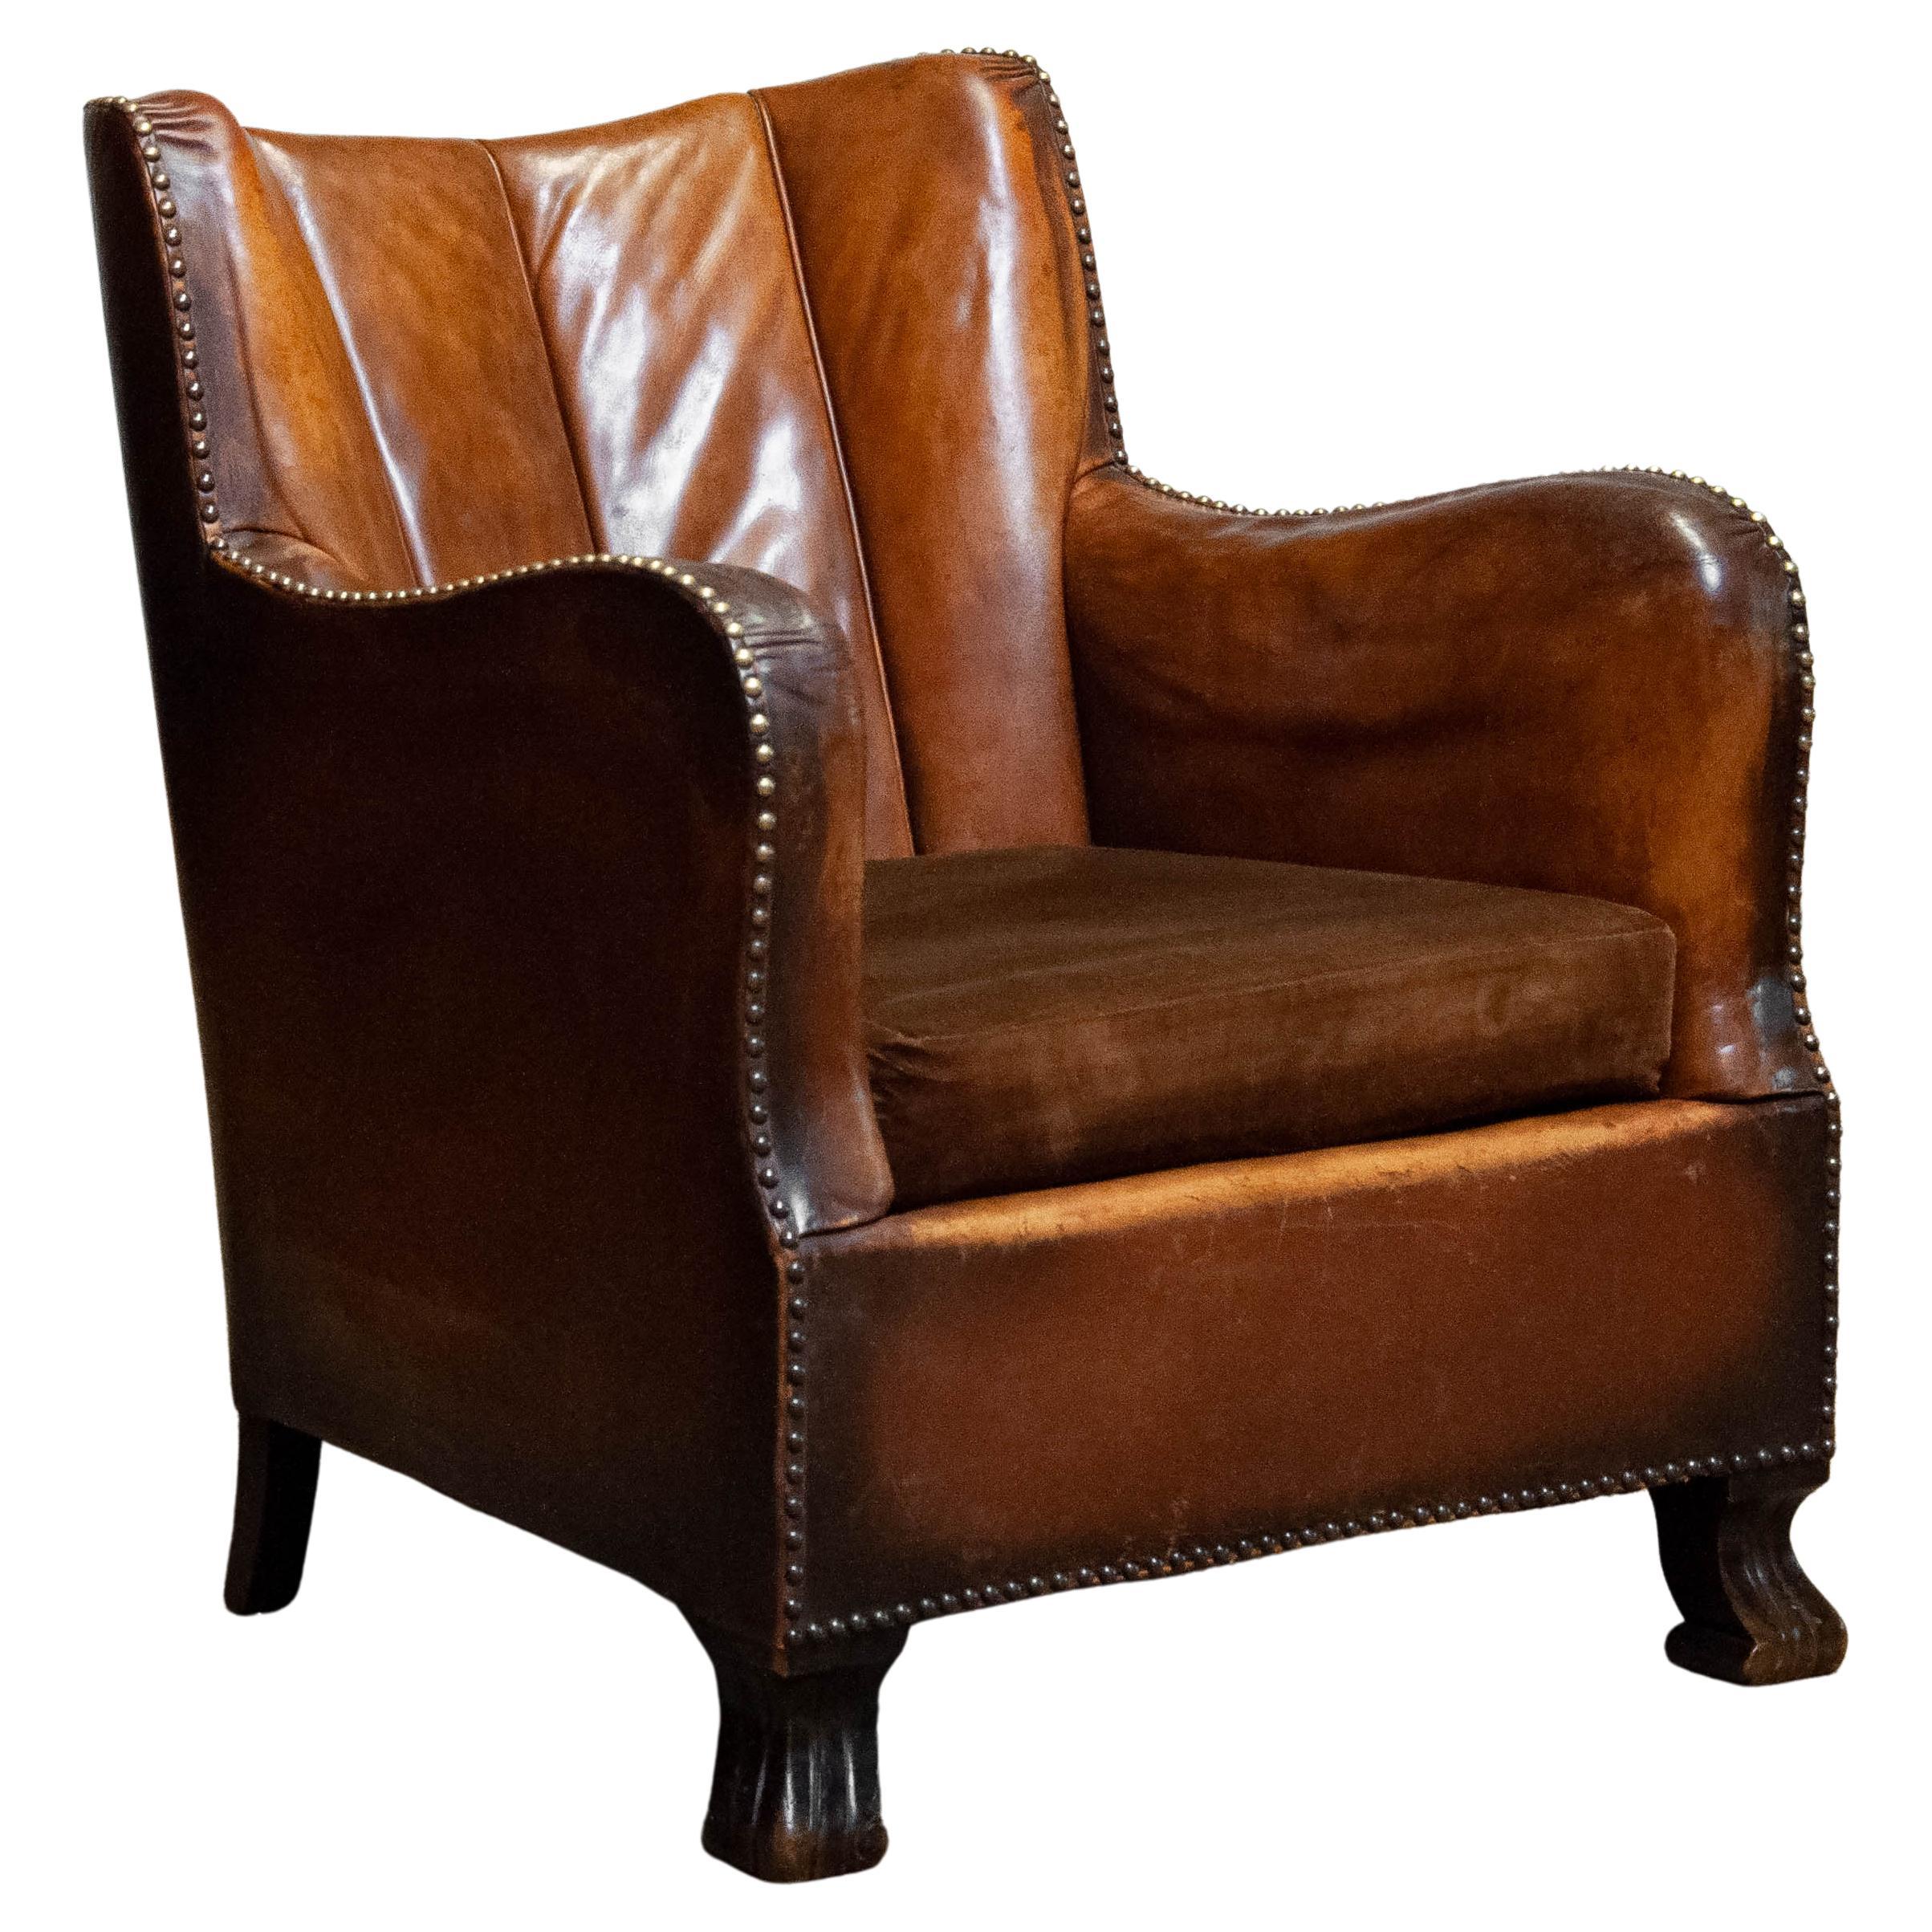 The 1930s Club Chair in Tan Brown Patinated Leather in the Style of Fritz Hansen im Angebot